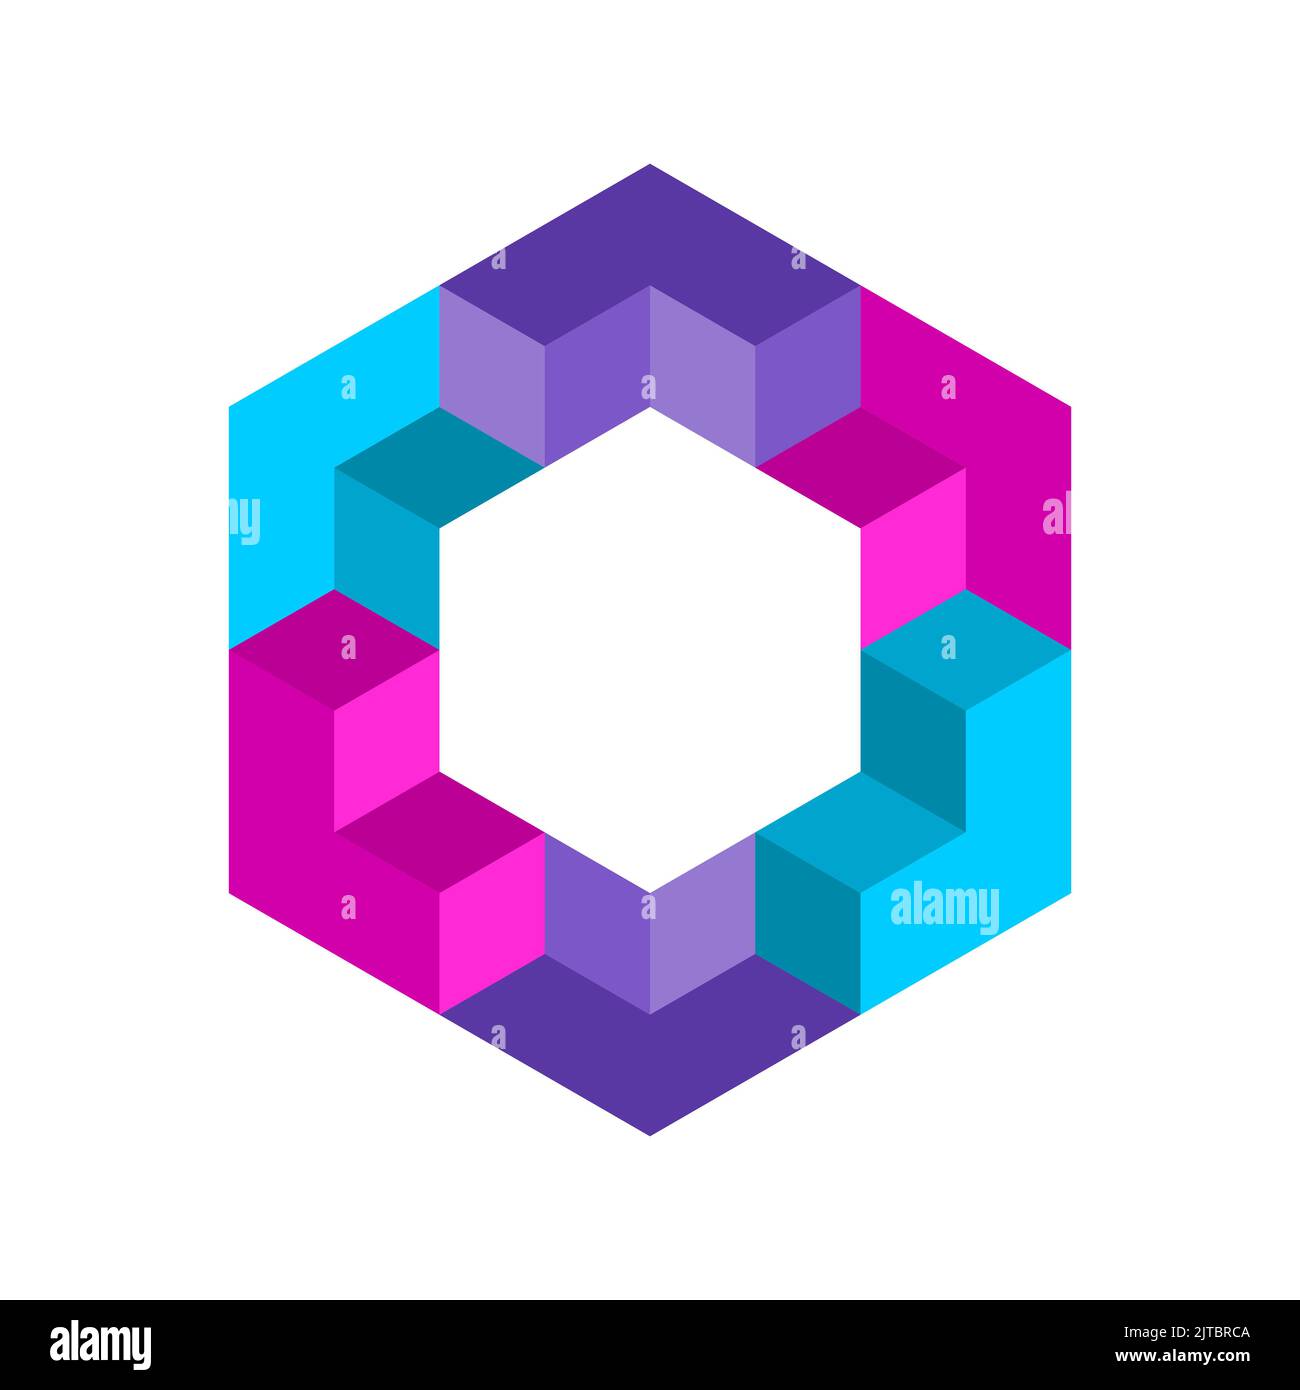 Colorful hexagon shape made of 3D elements. Creative logo template. Letter L reapeating. Symmetric geometric object. Teamwork concept. Vector Stock Vector